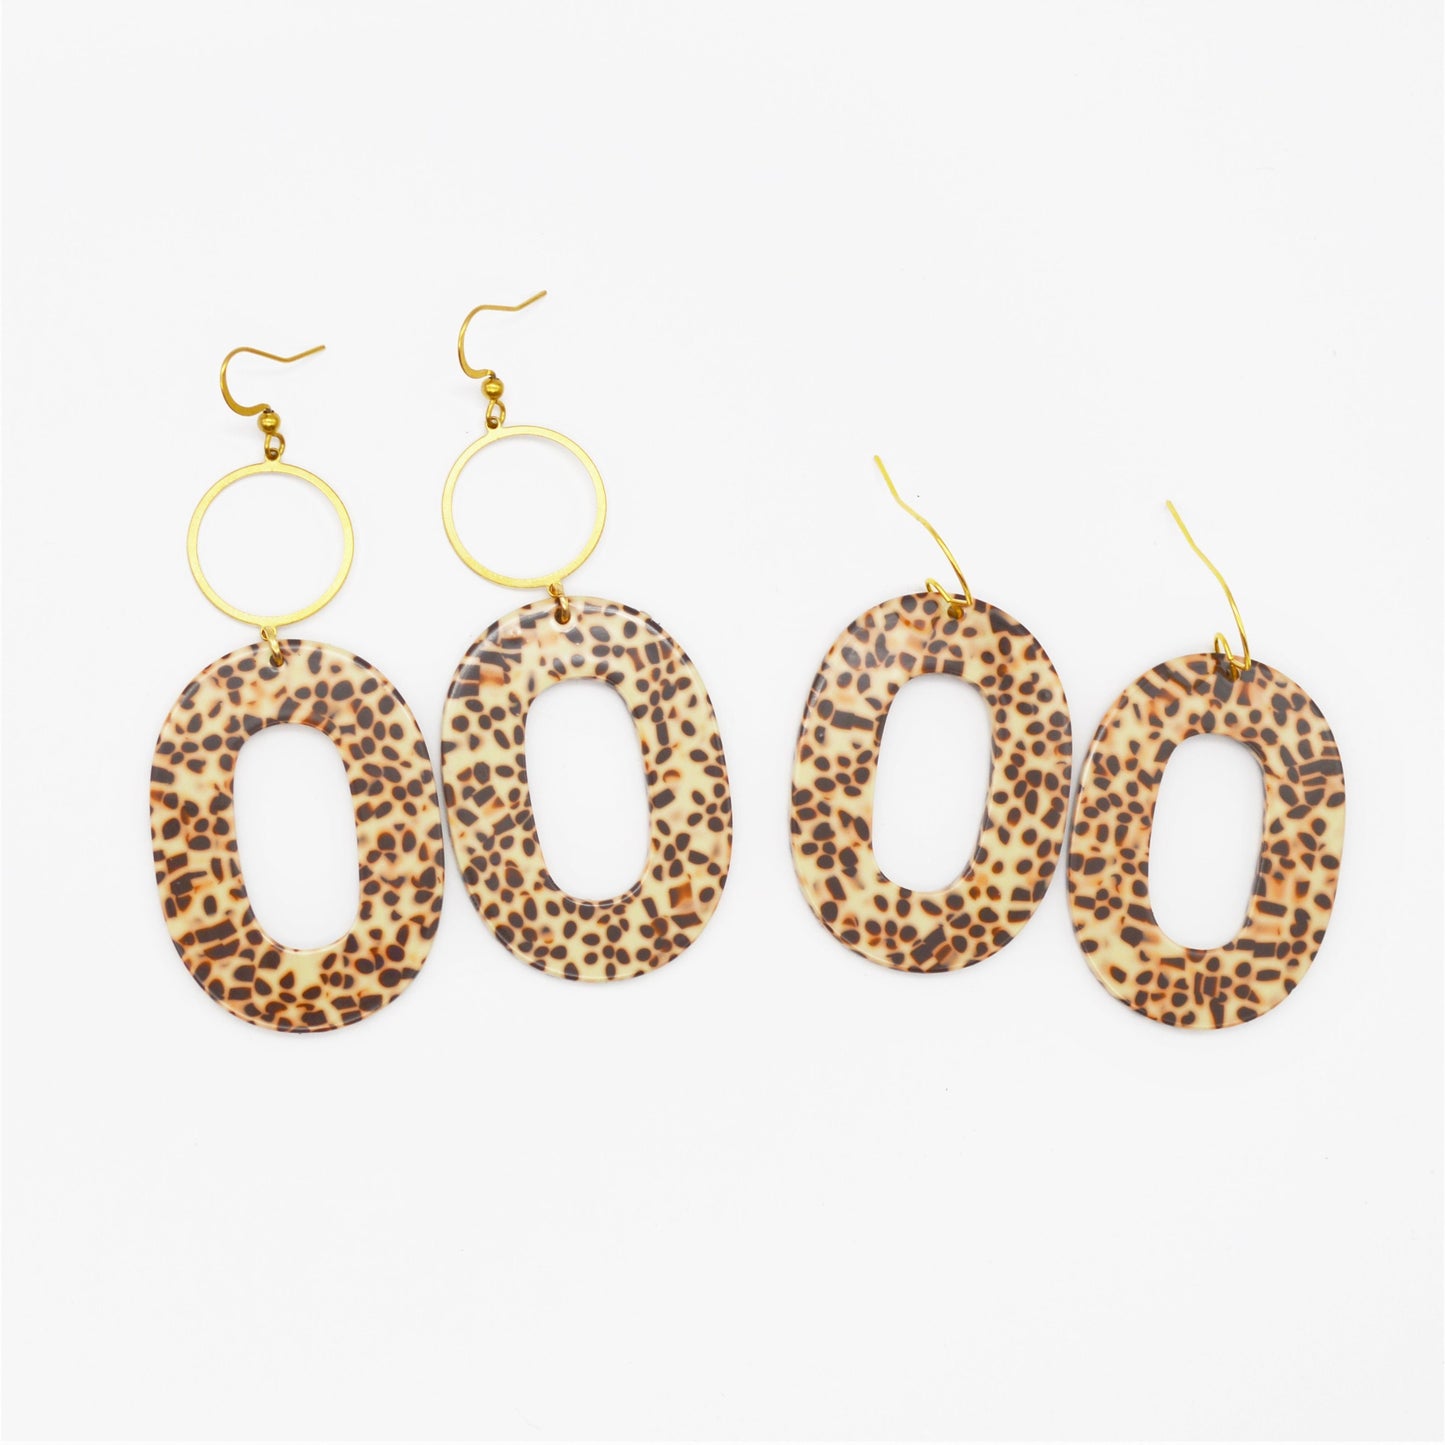 Handmade Lightweight Brown and Beige Spotted Oval Tortoiseshell Earrings with Gold Hoop Option